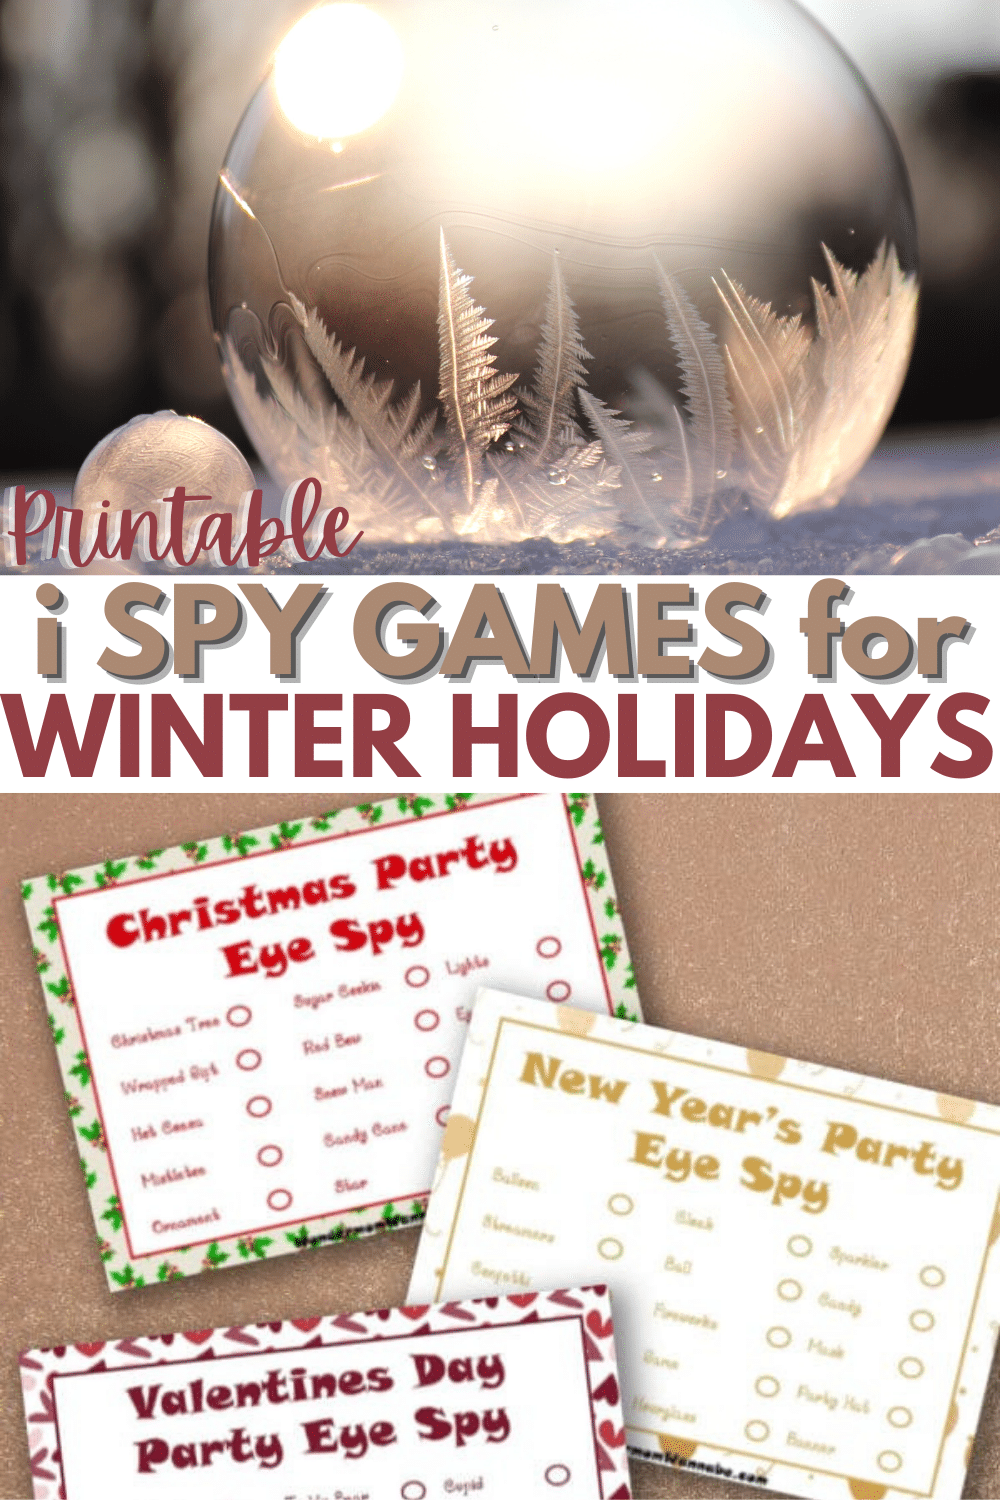 These printable I Spy games for winter holidays will keep the whole family involved and having fun. Games for Christmas, New Year's and Valentine's Day. #printables #ispy #activitiesforkids via @wondermomwannab